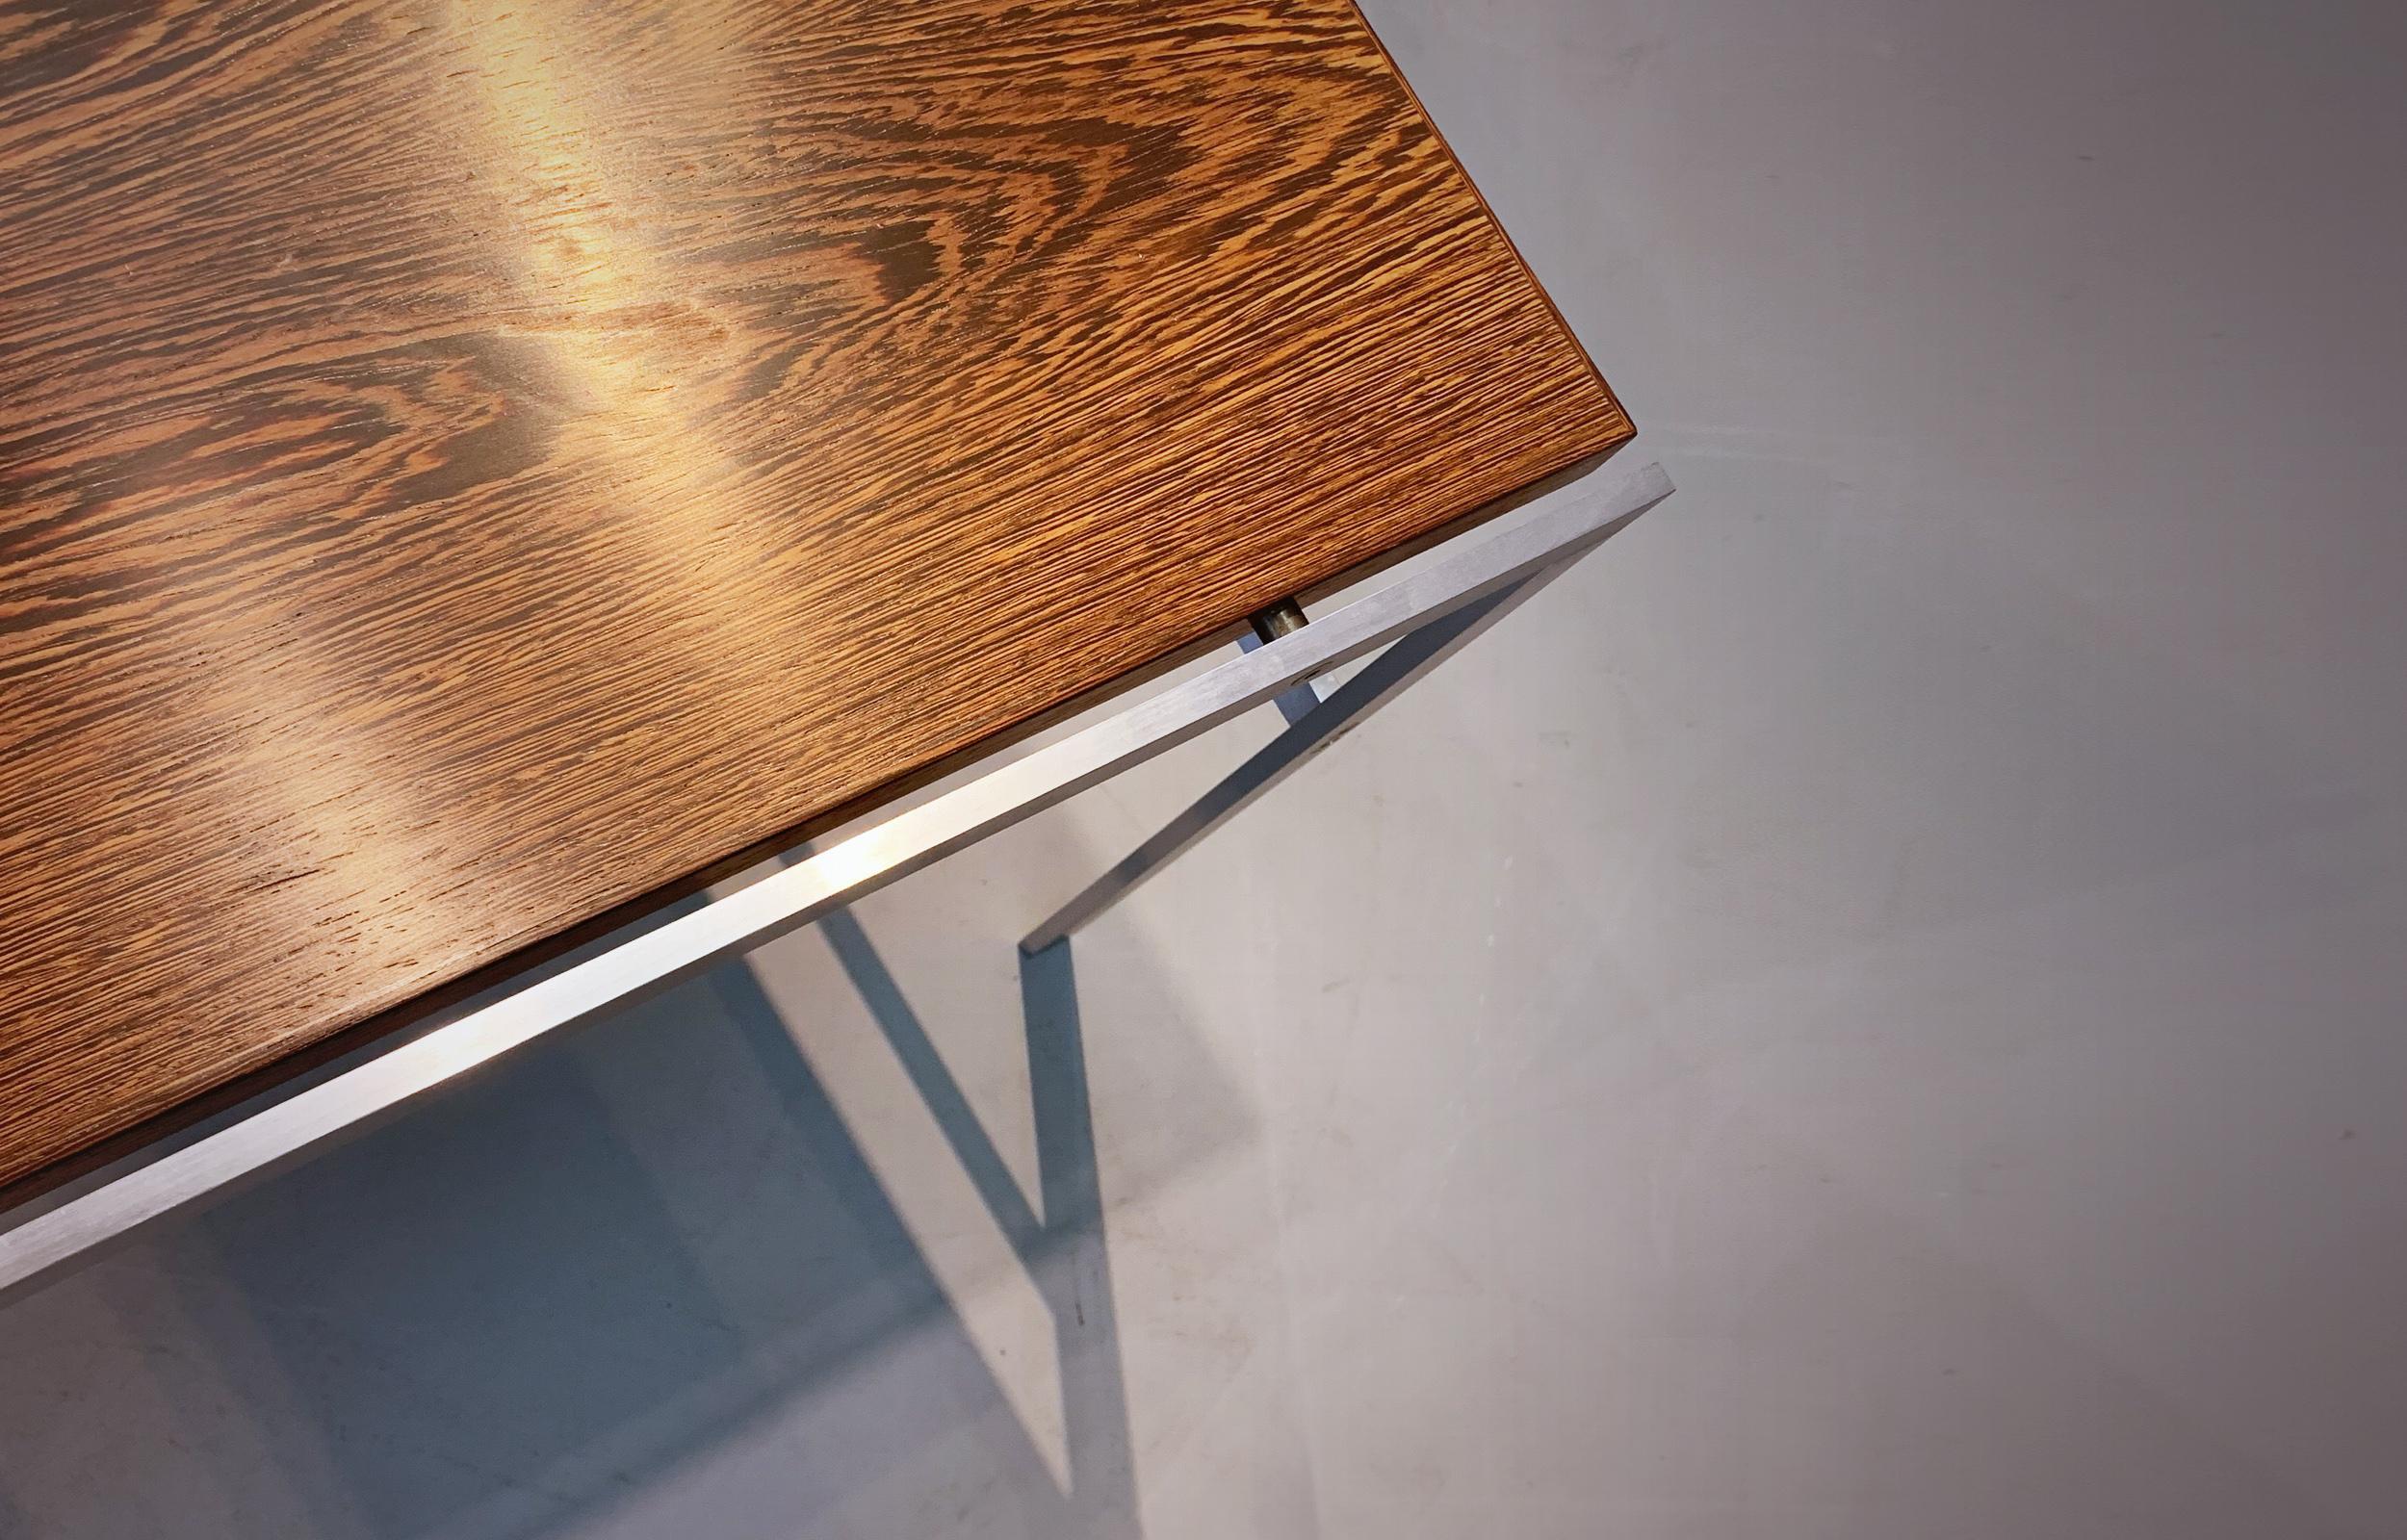 Preben Fabricius Jorgen Kastholm side / coffee table produced by Bo-Ex / Denmark in the 1960s. Tabletop made of highly grained Wengé wood. Base made of matte chromed steel. A wonderful, minimalistic table.

Perfect vintage condition.